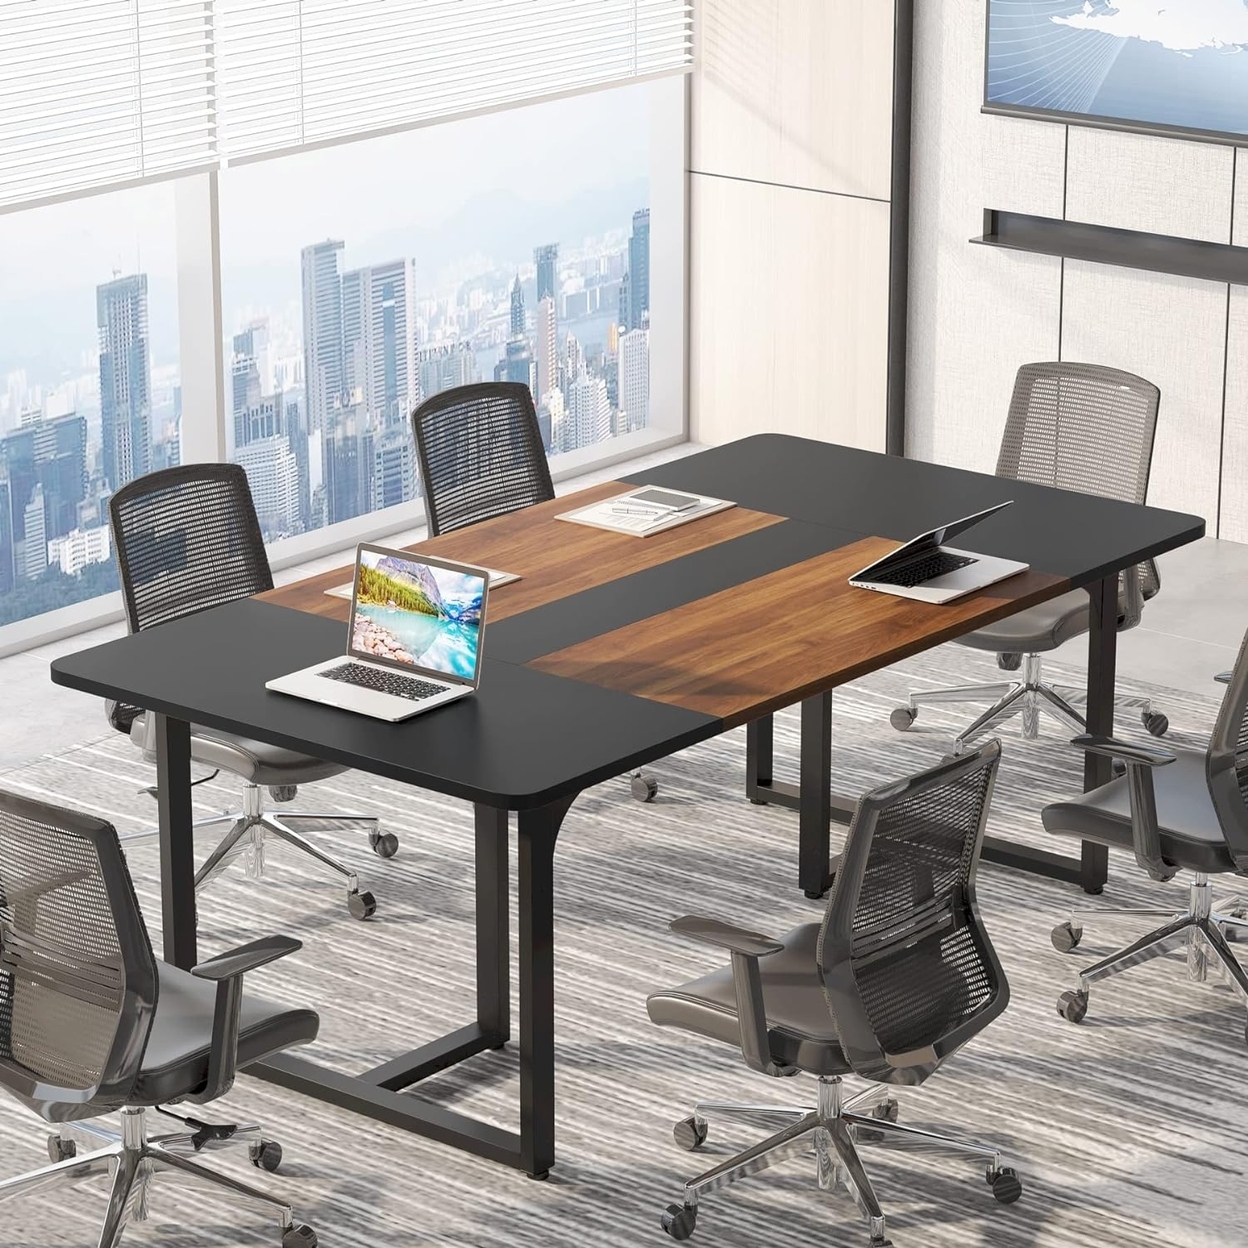 Rectangle Conference Table, Business Style Large Office Conference Room Table Boardroom Desk With Strong Metal Legs - Retro Brown